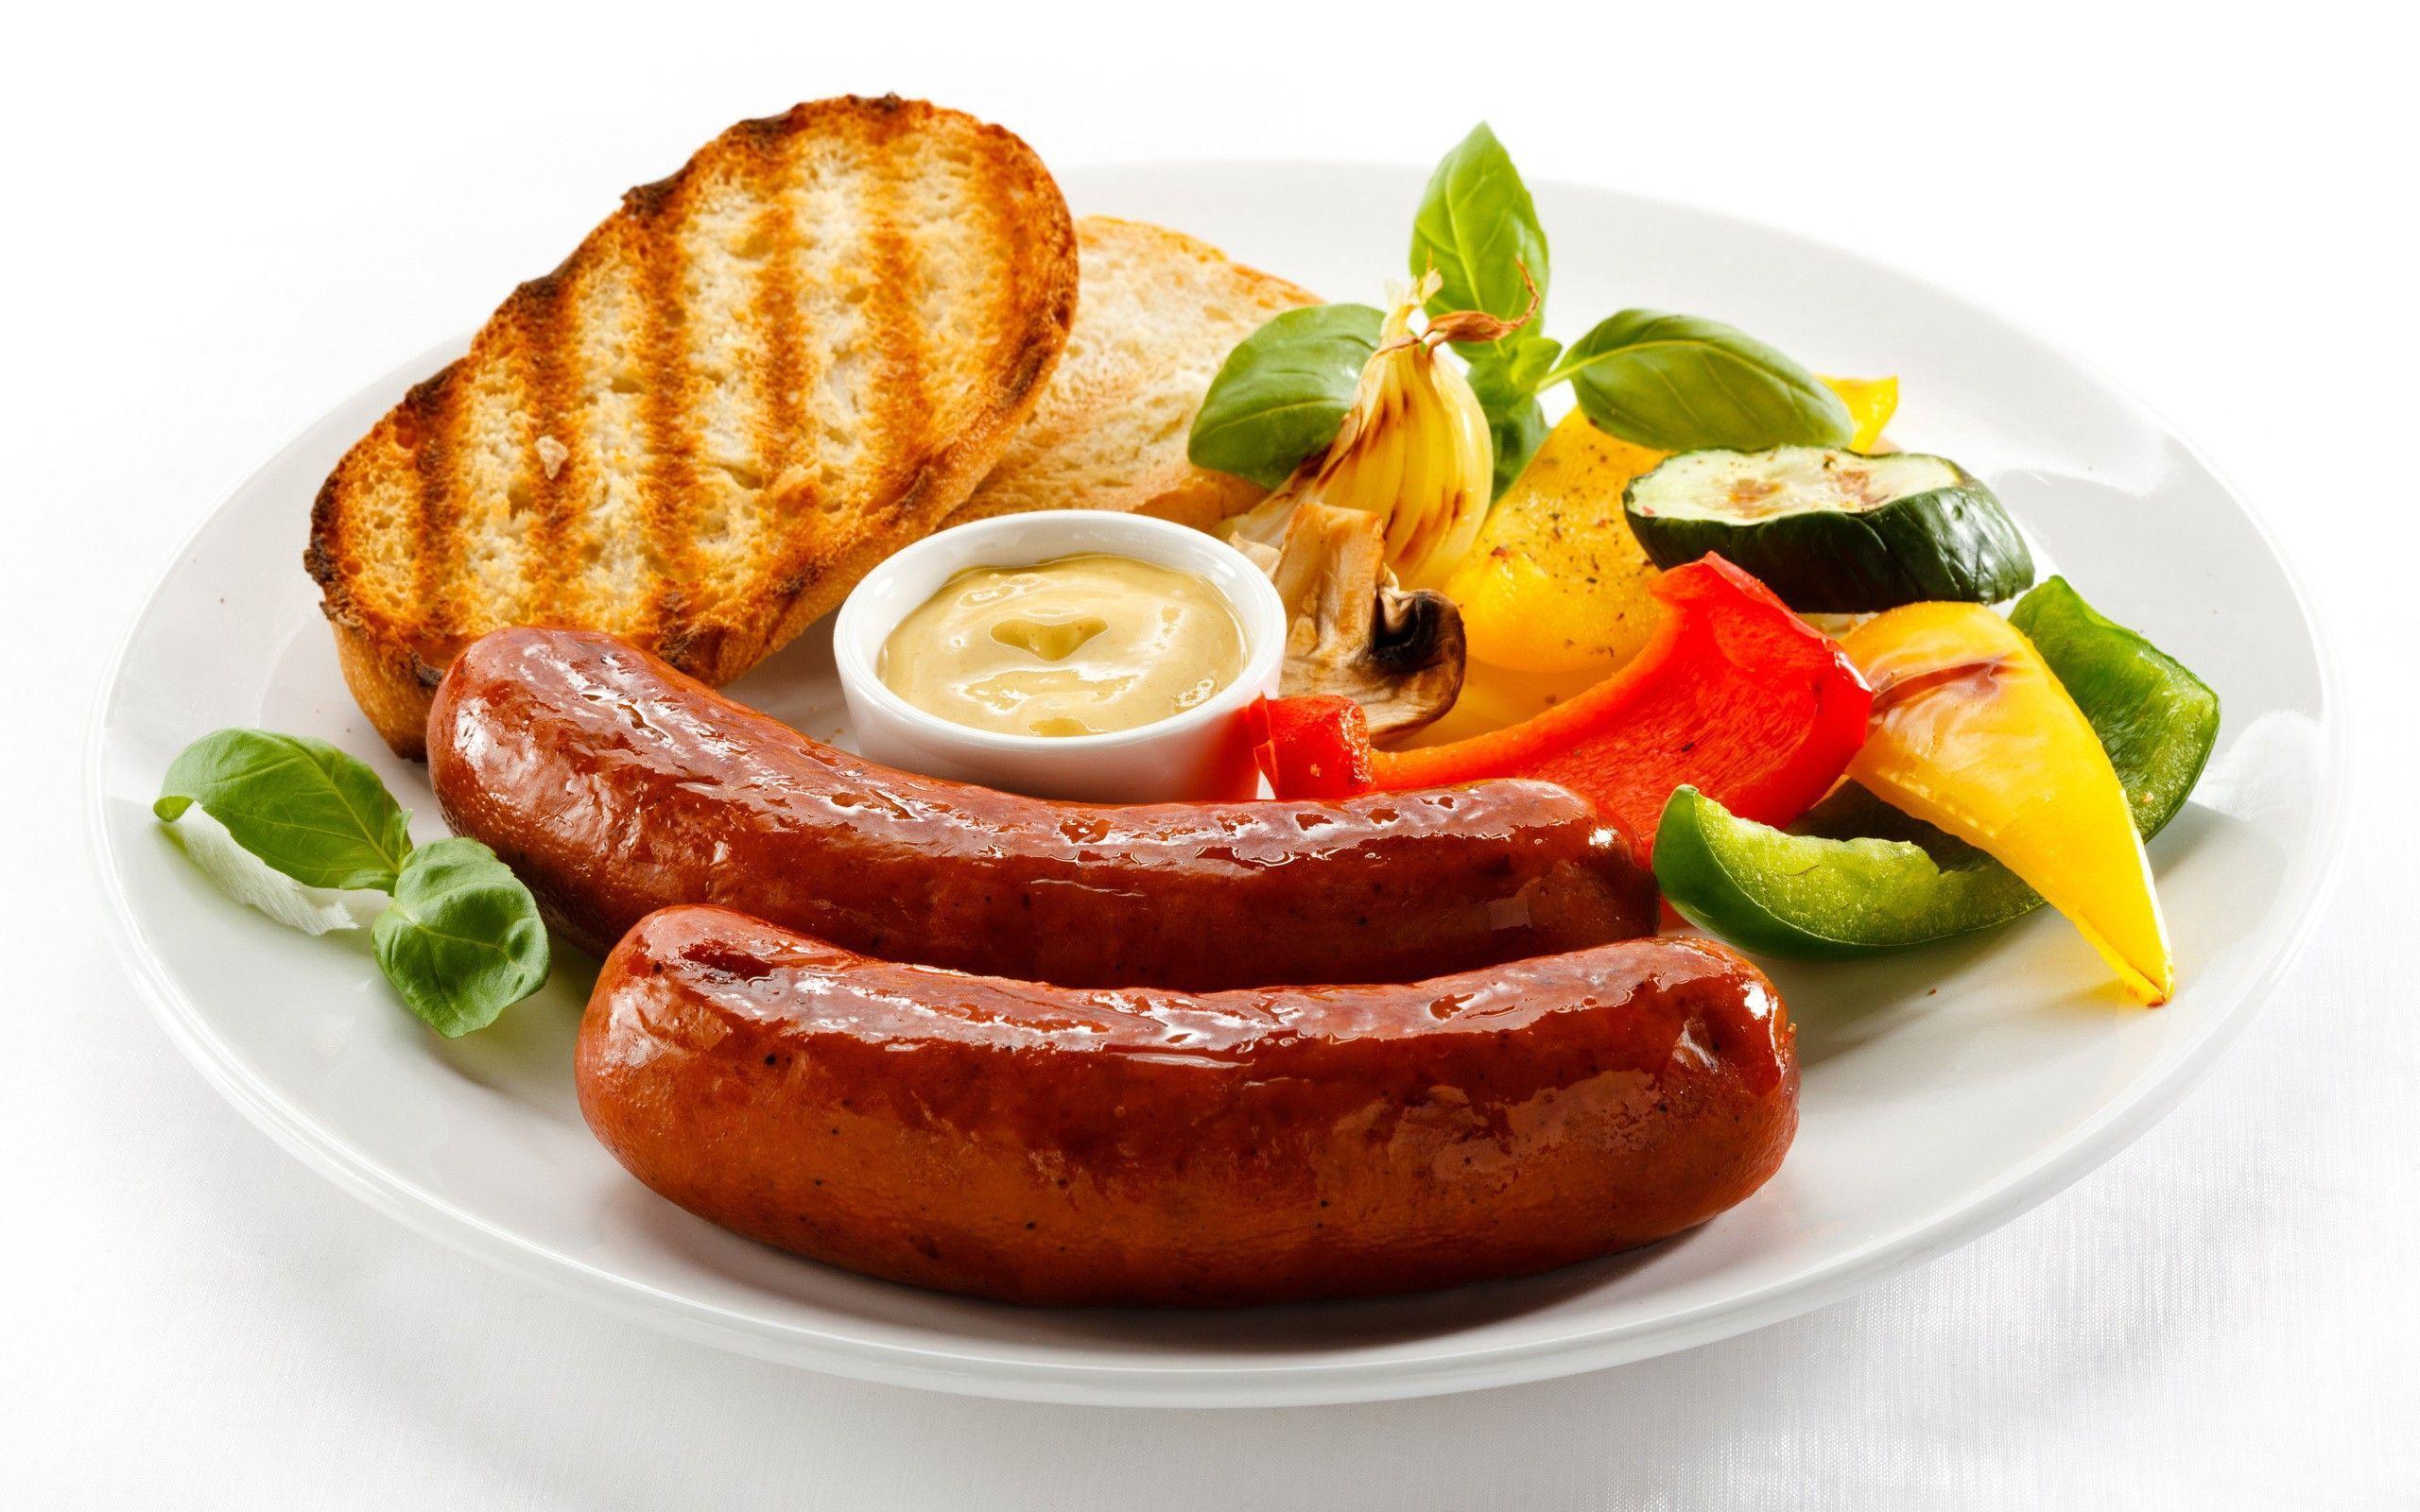 Two sausages for a breakfast wallpaper and image